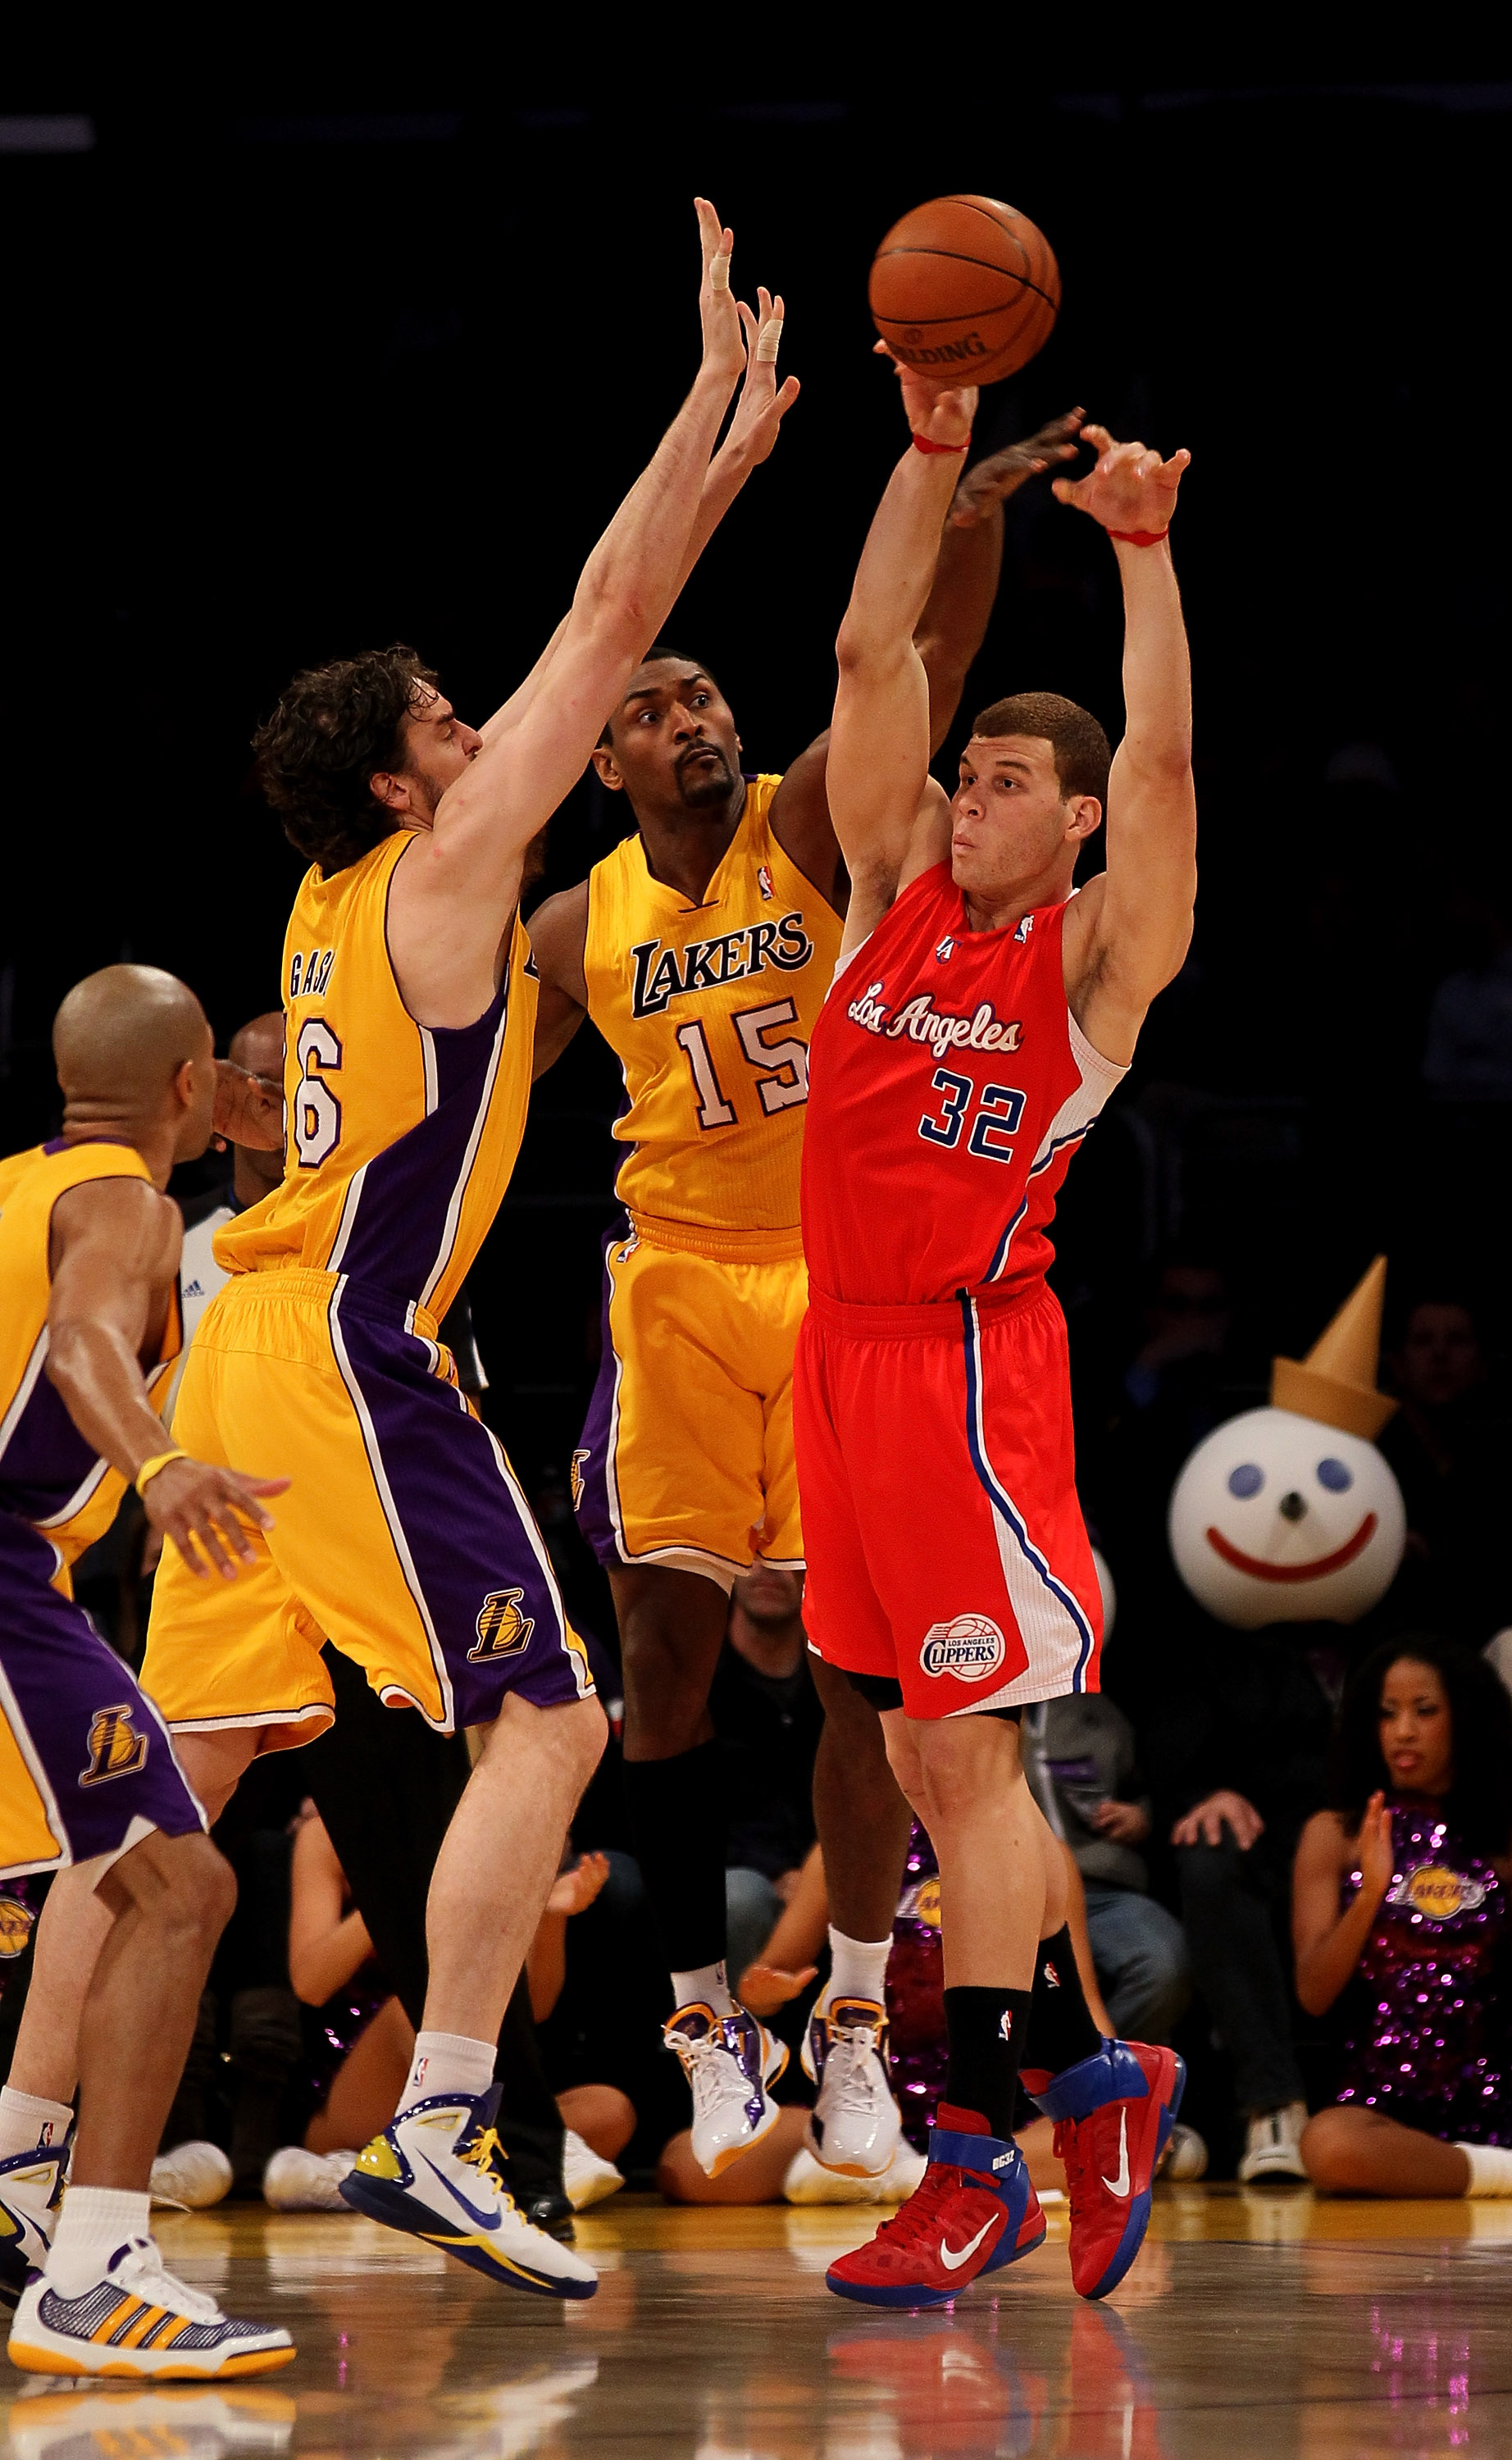 LOS ANGELES, CA - FEBRUARY 25:  Blake Griffin #32 of the Los Angeles Clippers passes off the ball away from Pau Gasol #16 and Ron Artest #15 of the Los Angeles Lakers at Staples Center on February 25, 2011 in Los Angeles, California. The Lakers won 100-88